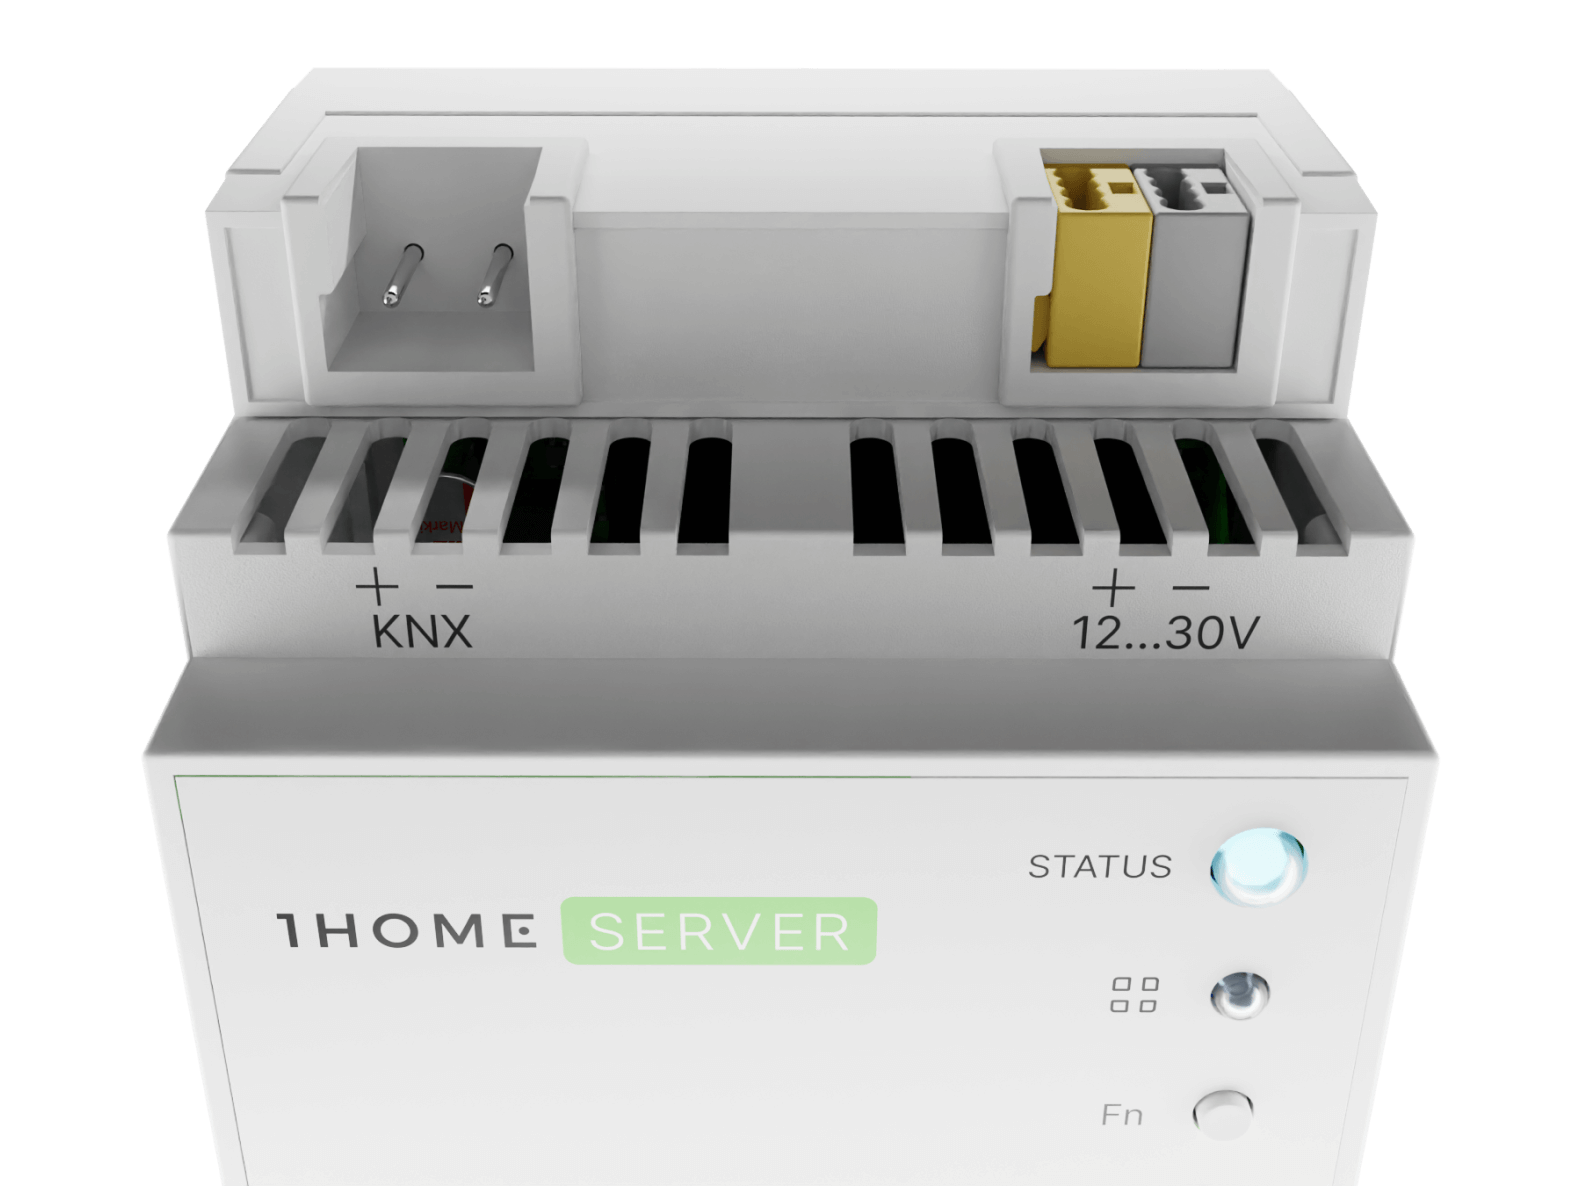 1Home Server for Loxone